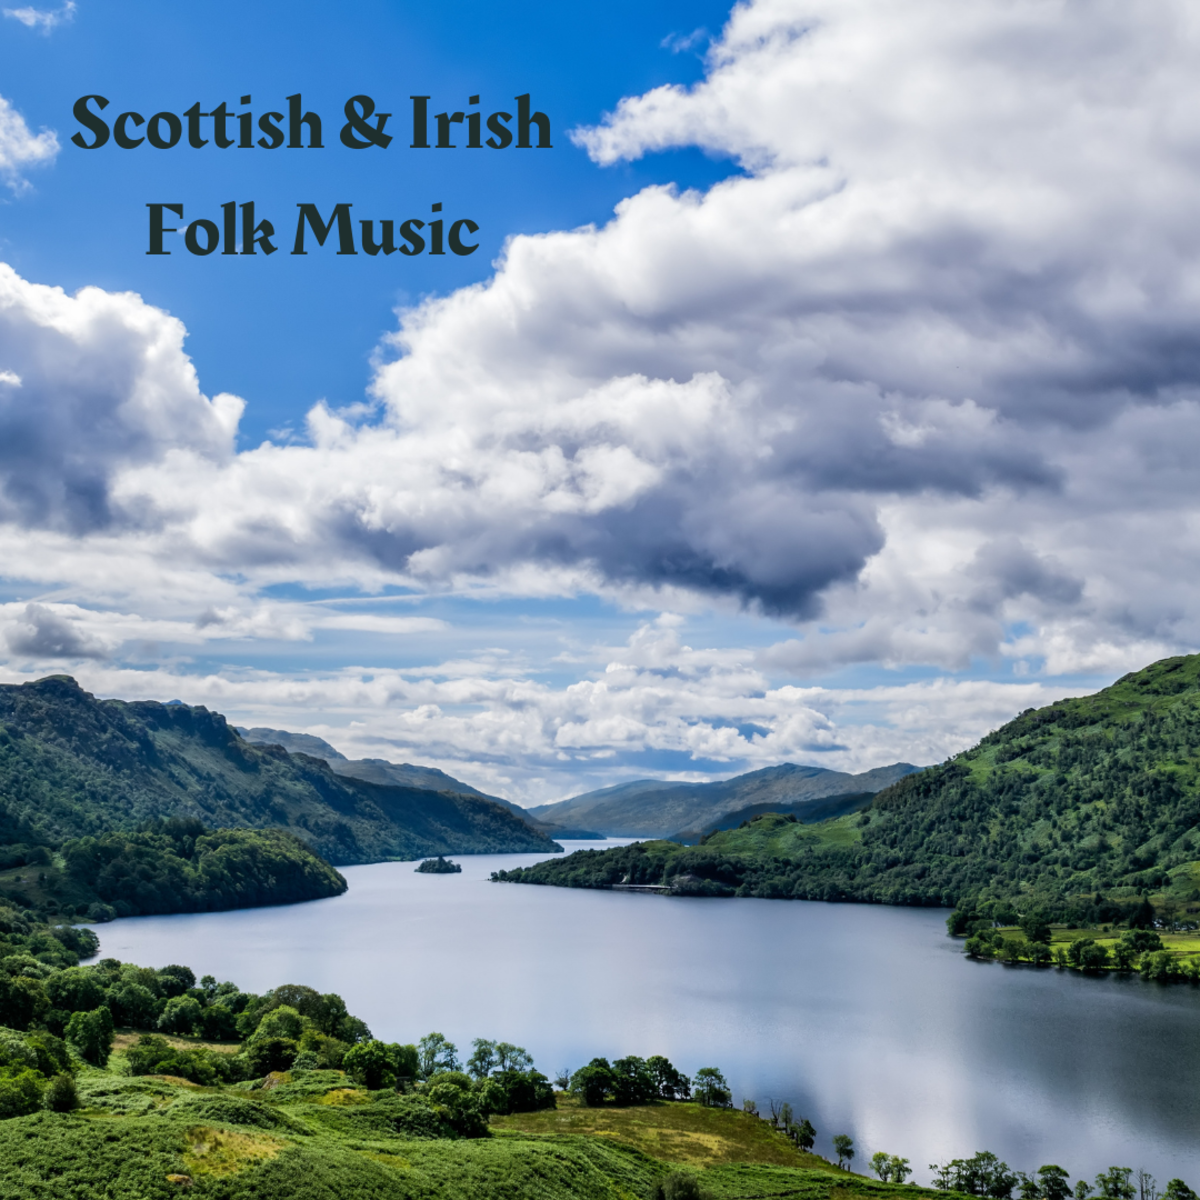 Scotland and Ireland have a rich musical heritage.